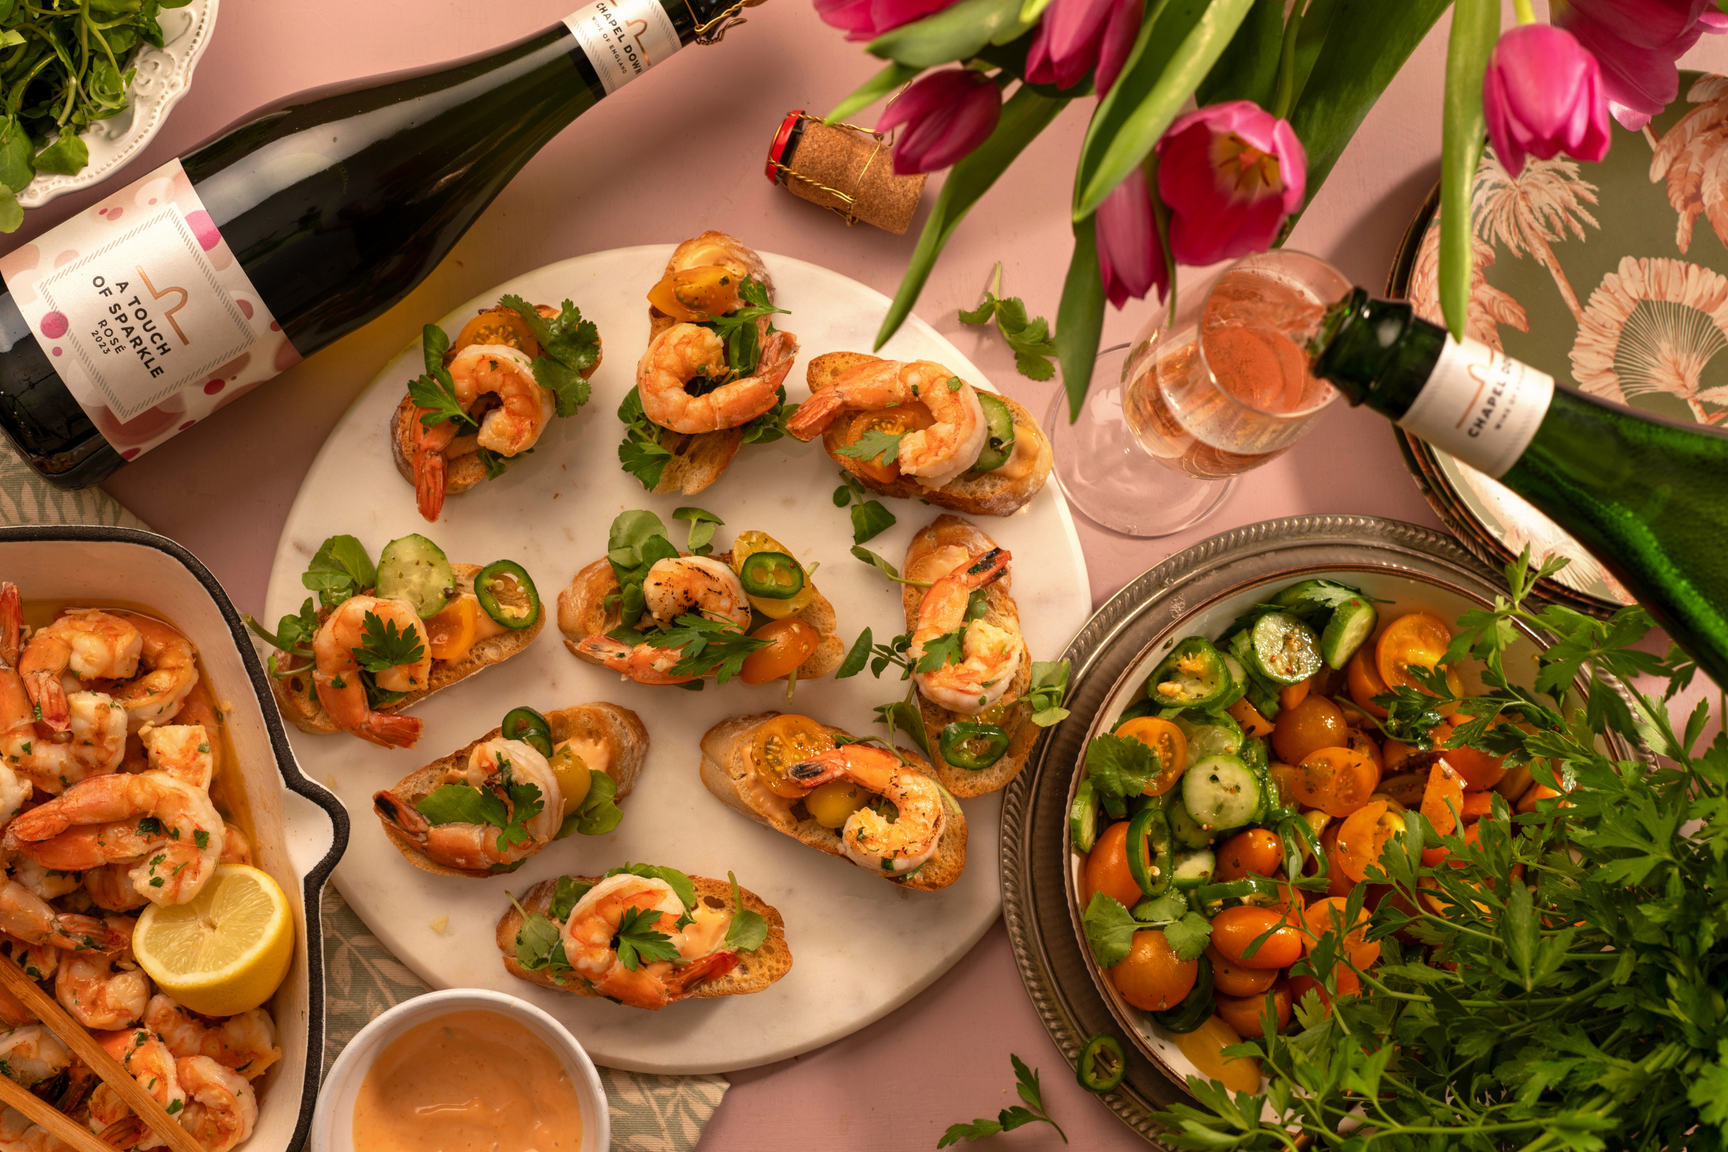 GRILLED GARLIC PRAWN CROSTINIS WITH TOMATO SALSA AND A GLASS OF ROSÉ